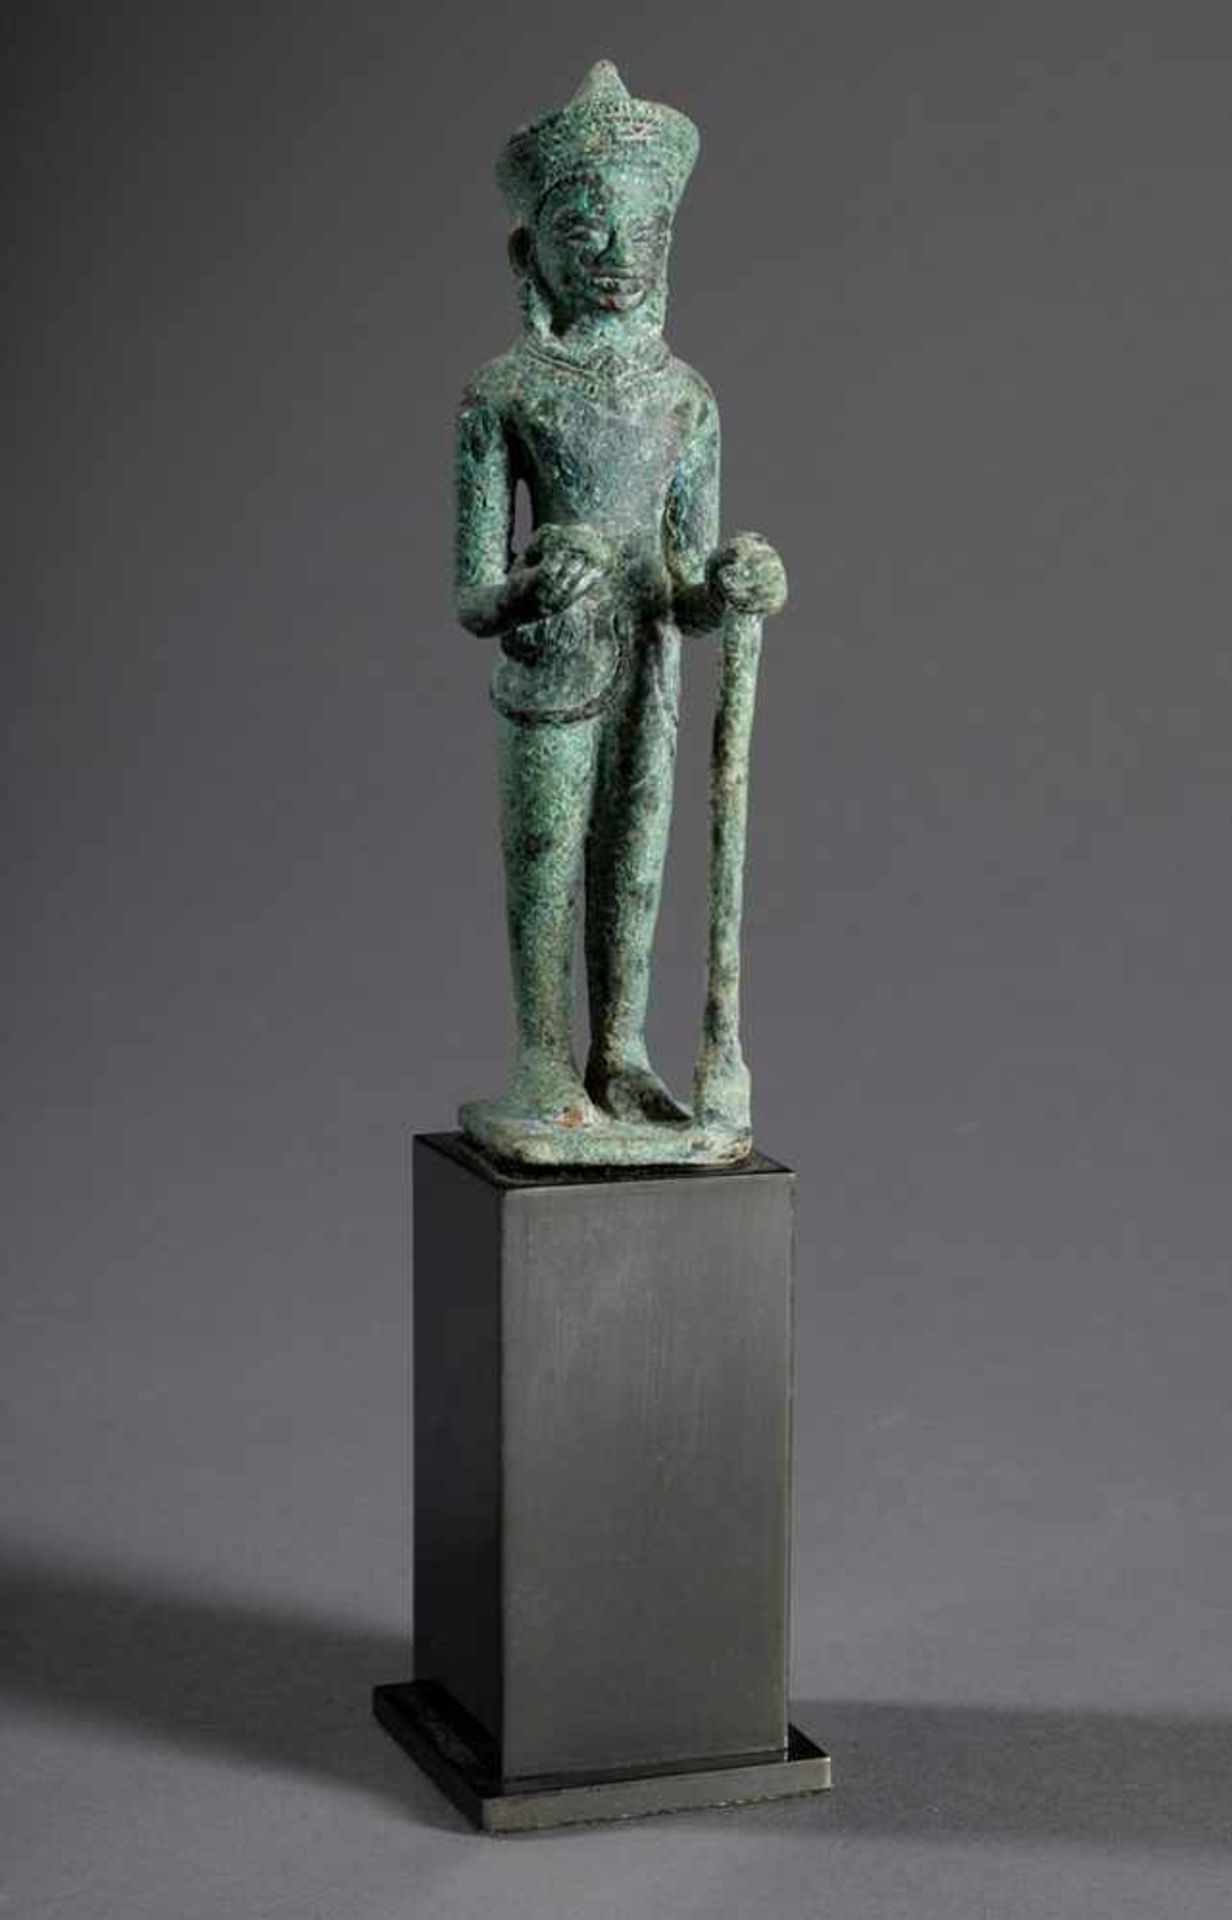 Standing Khmer bronze figure "Godness" holding a chakra in her right hand, probably Shiva, Bayon - Image 2 of 4